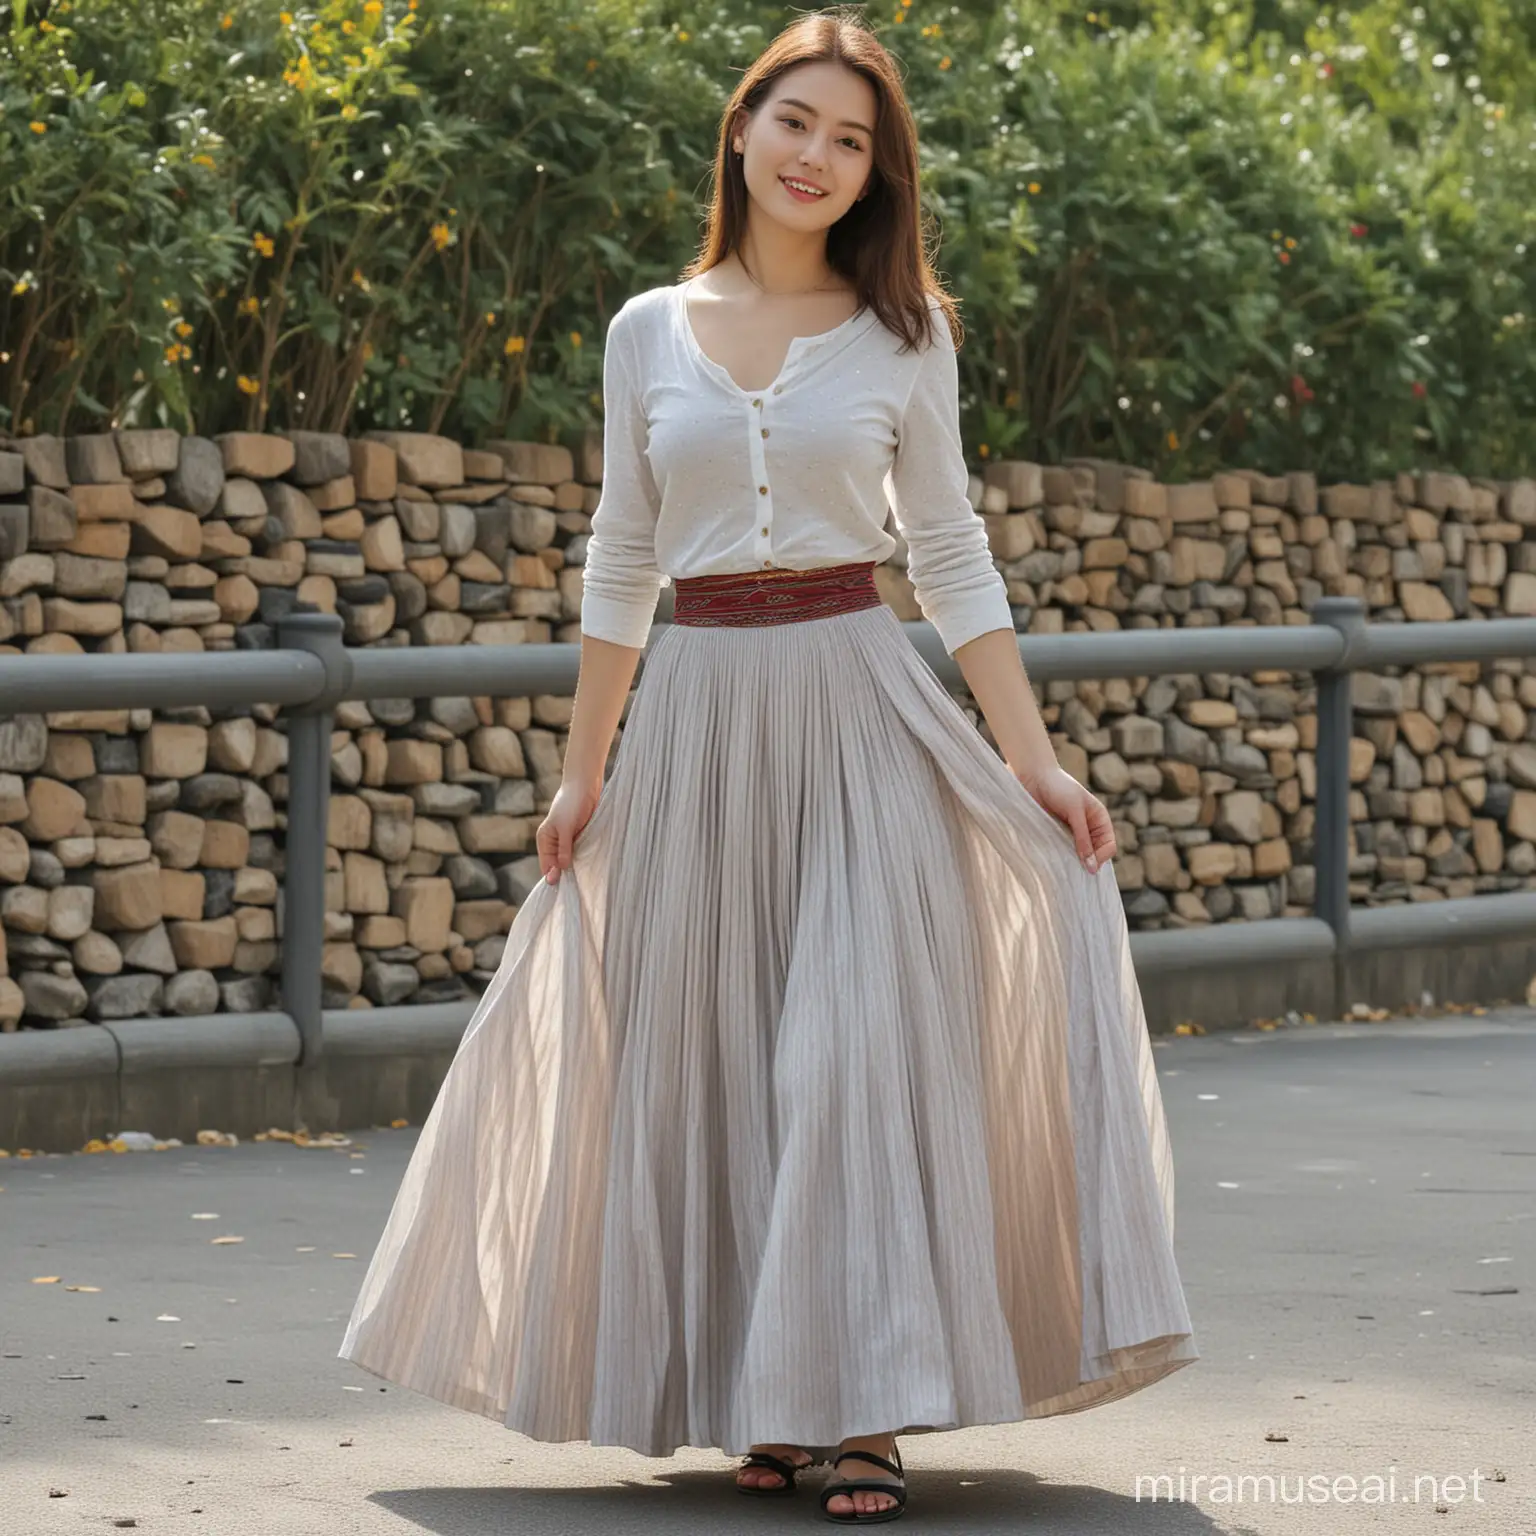 25 year old girl in very long skirt